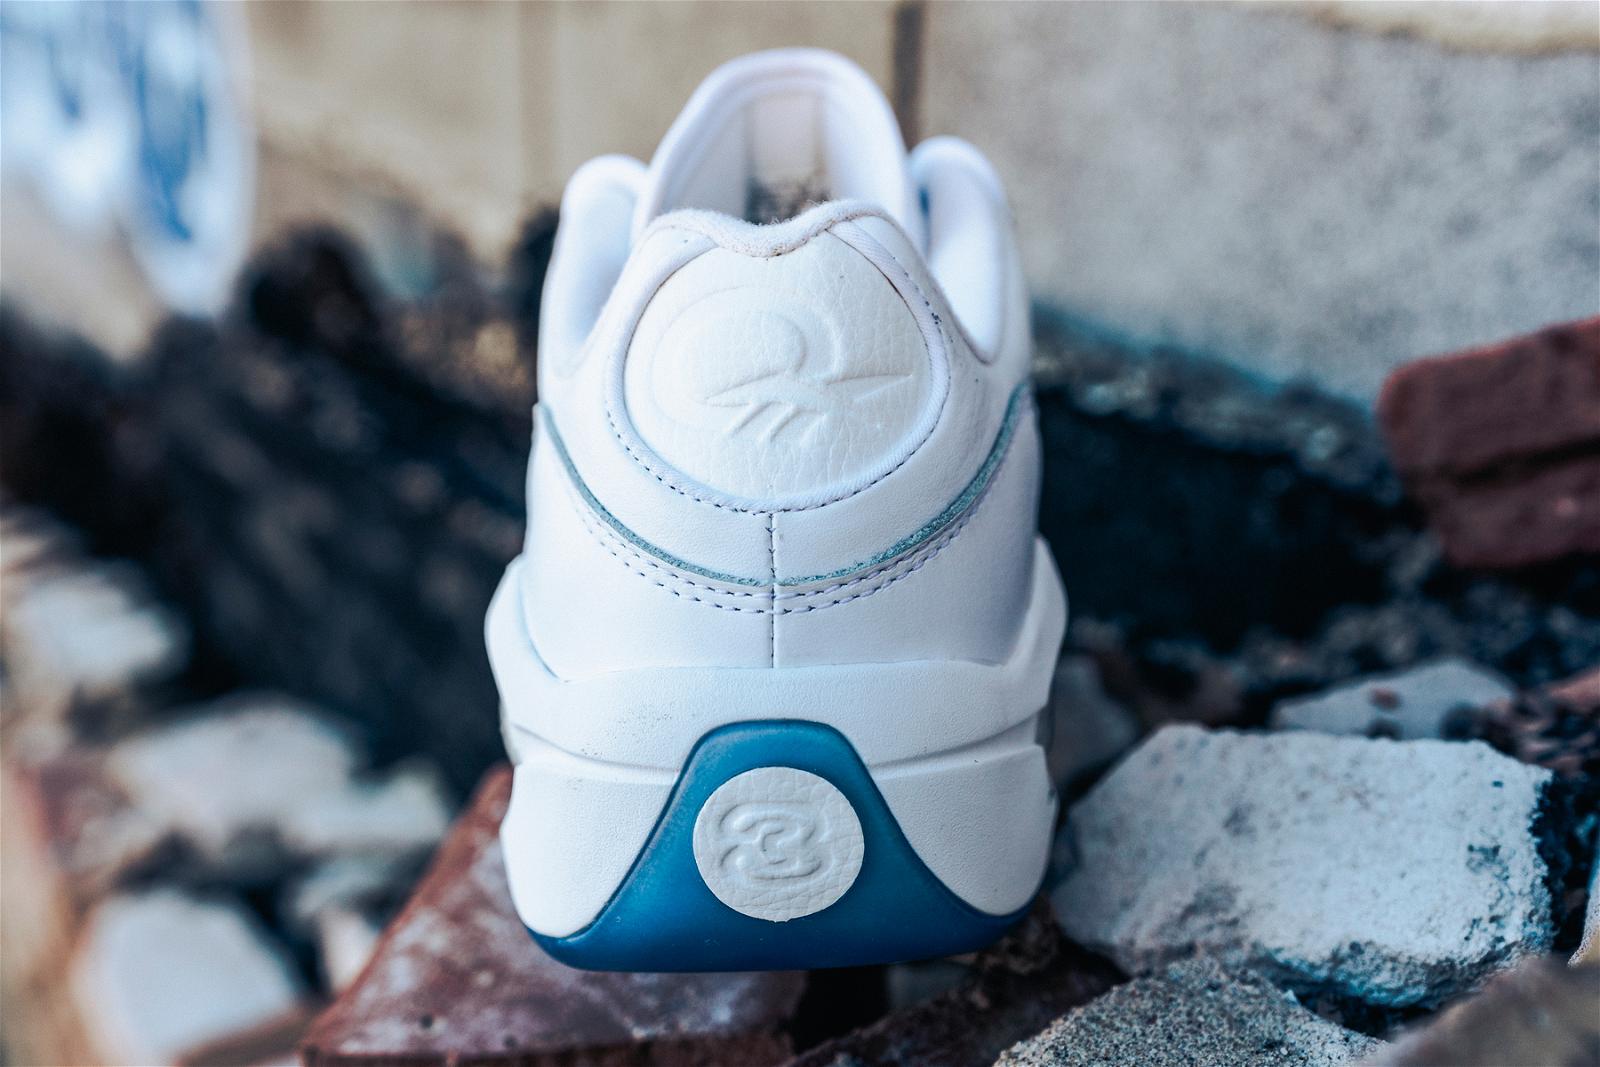 Reebok Question Low White Ice